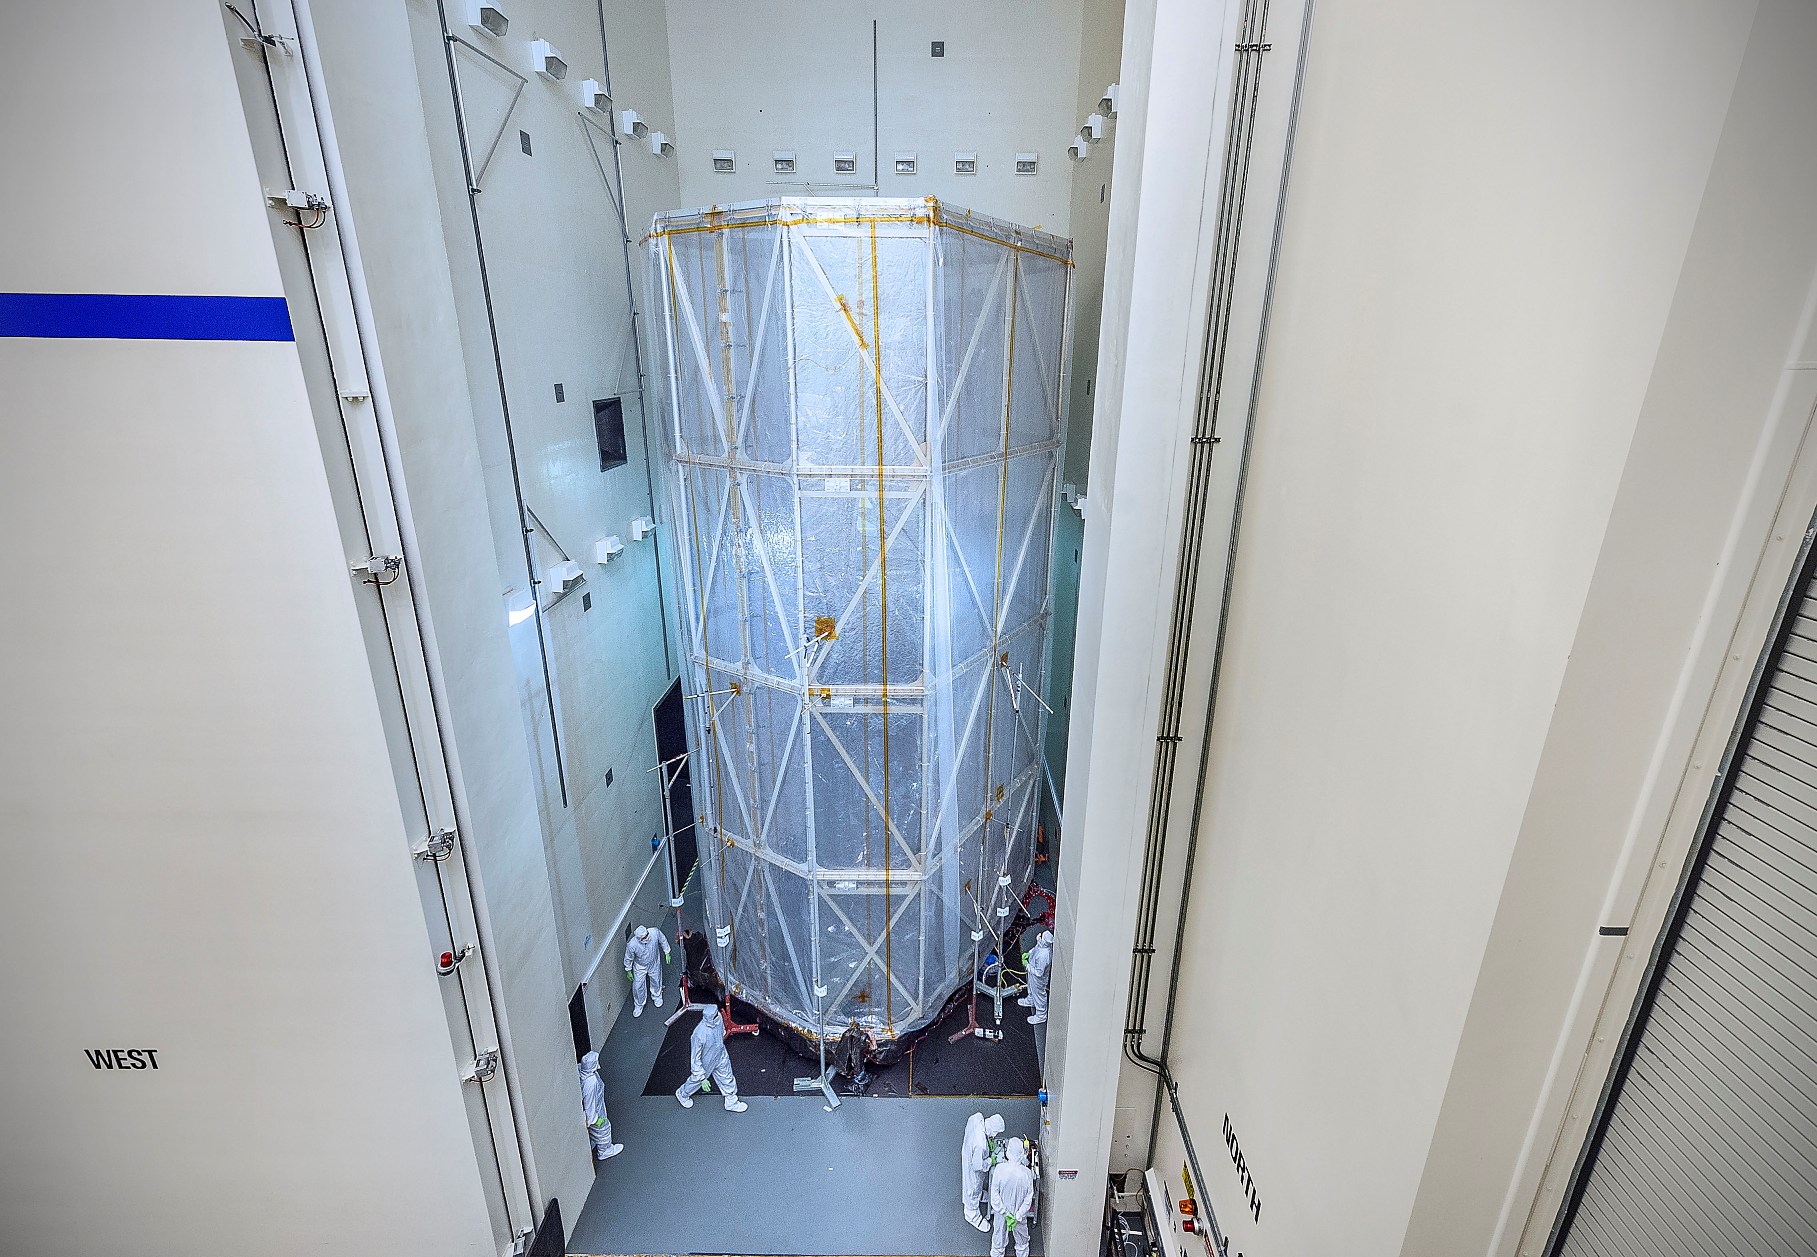 James Webb Space Telescope undergoes environmental testing to simulate the rigours of launch